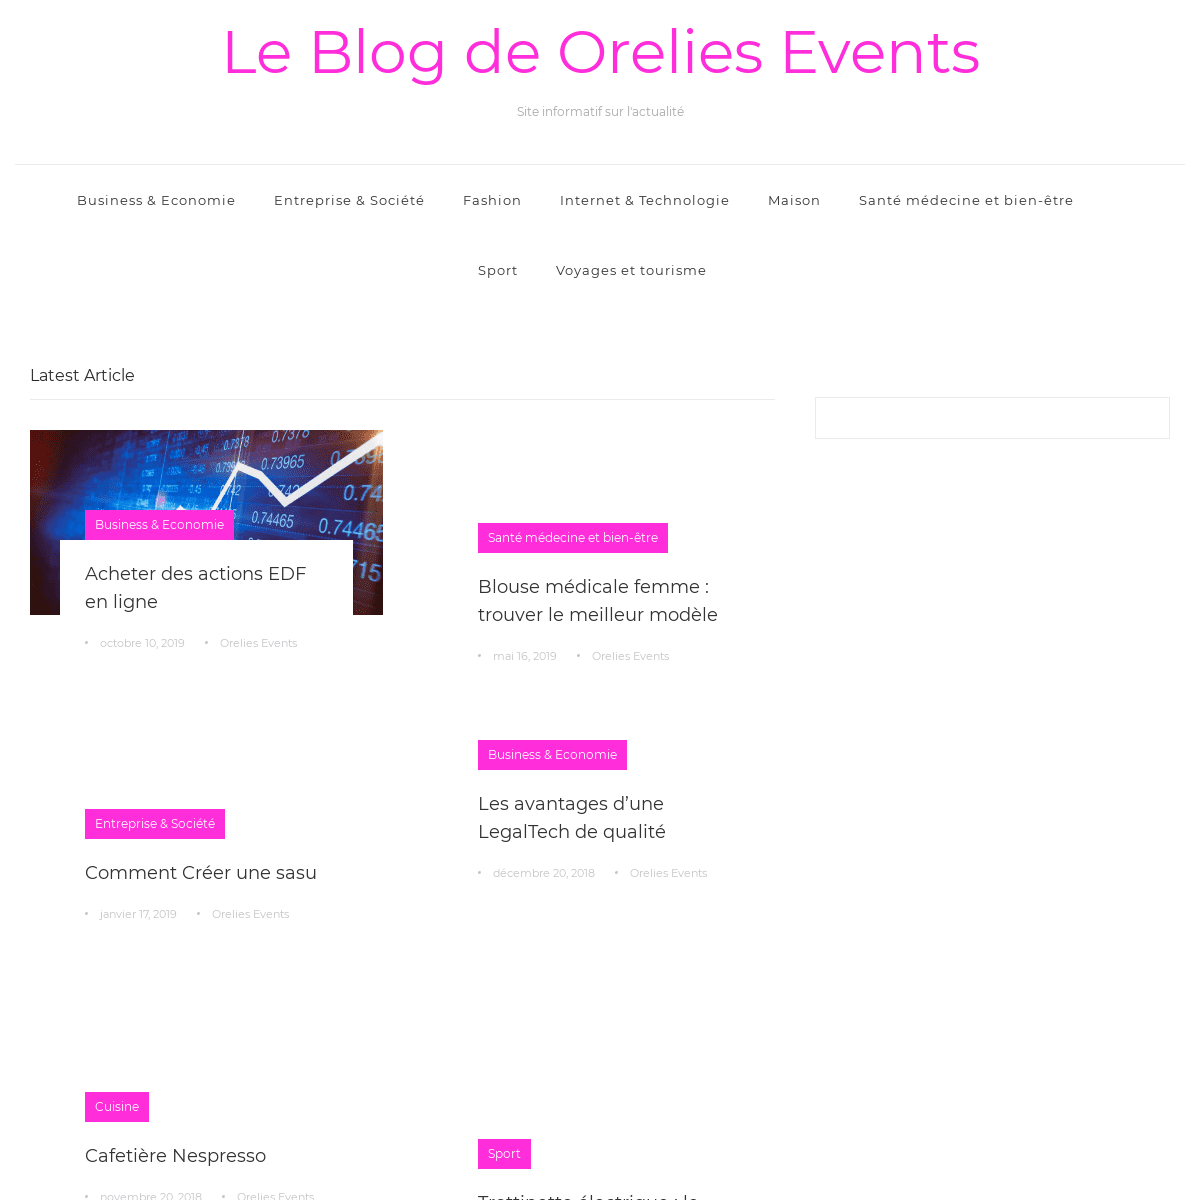 A complete backup of https://orelies-events.fr